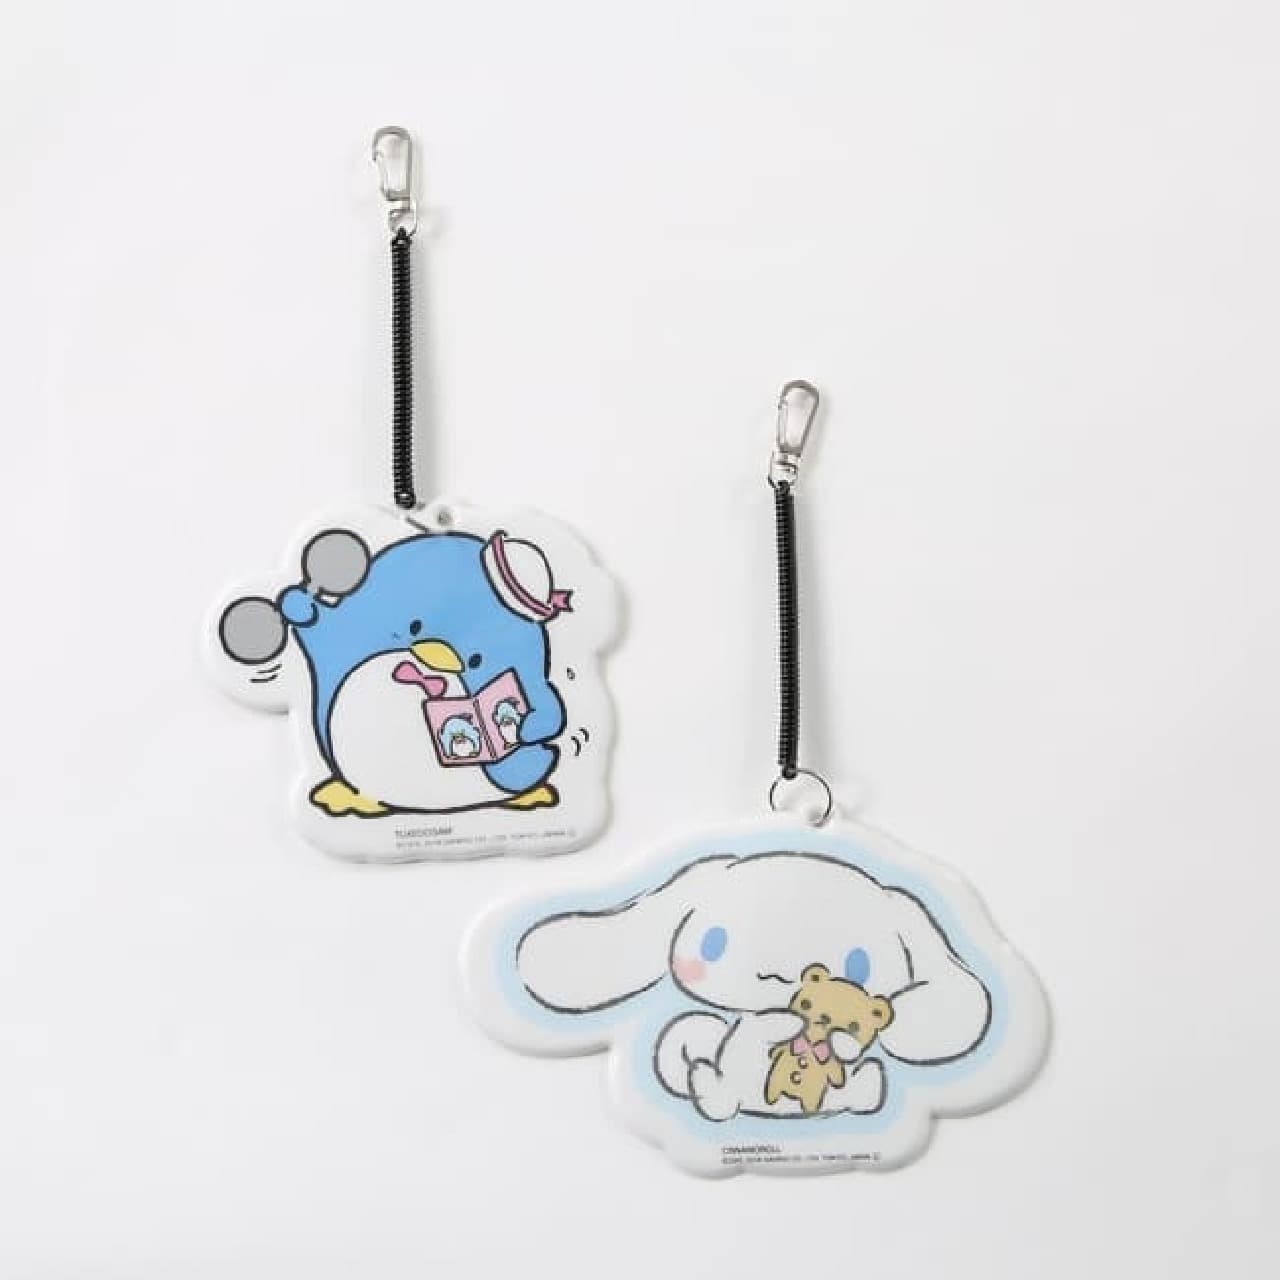 Collaboration product of 3COINS and Sanrio